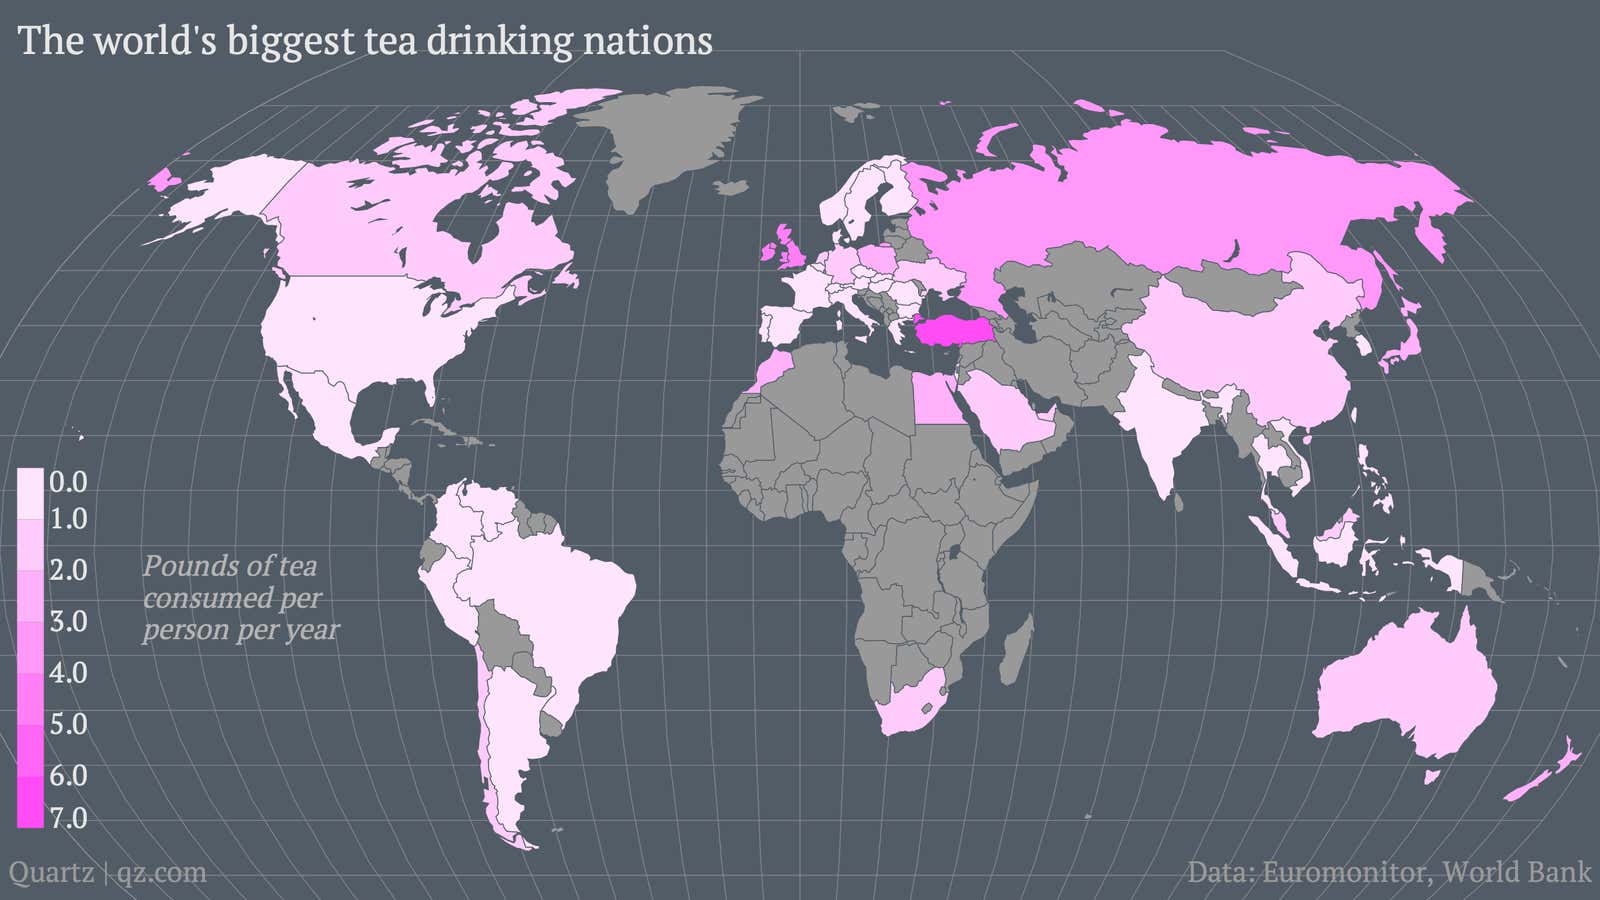 There’s no tea-drinking country quite like Turkey.